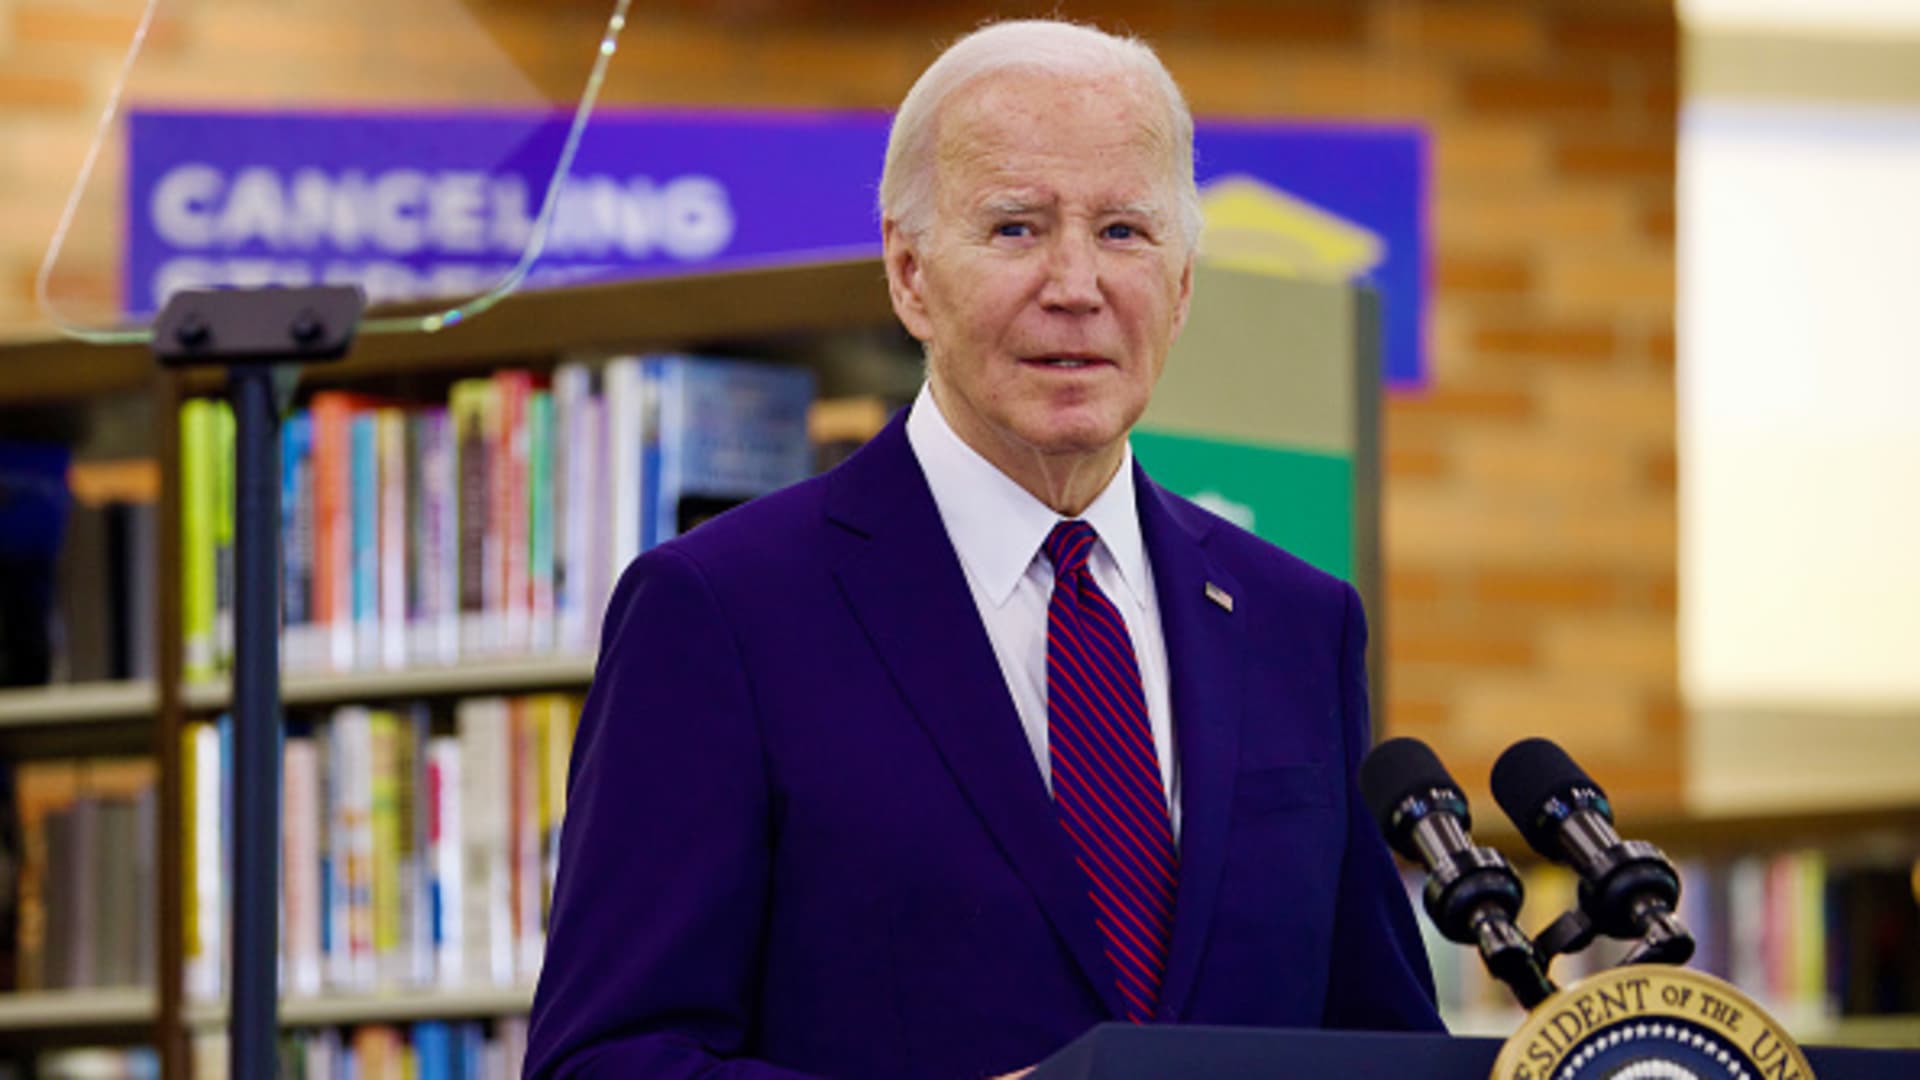 Biden will announce new student loan forgiveness plan impacting tens of millions of Americans